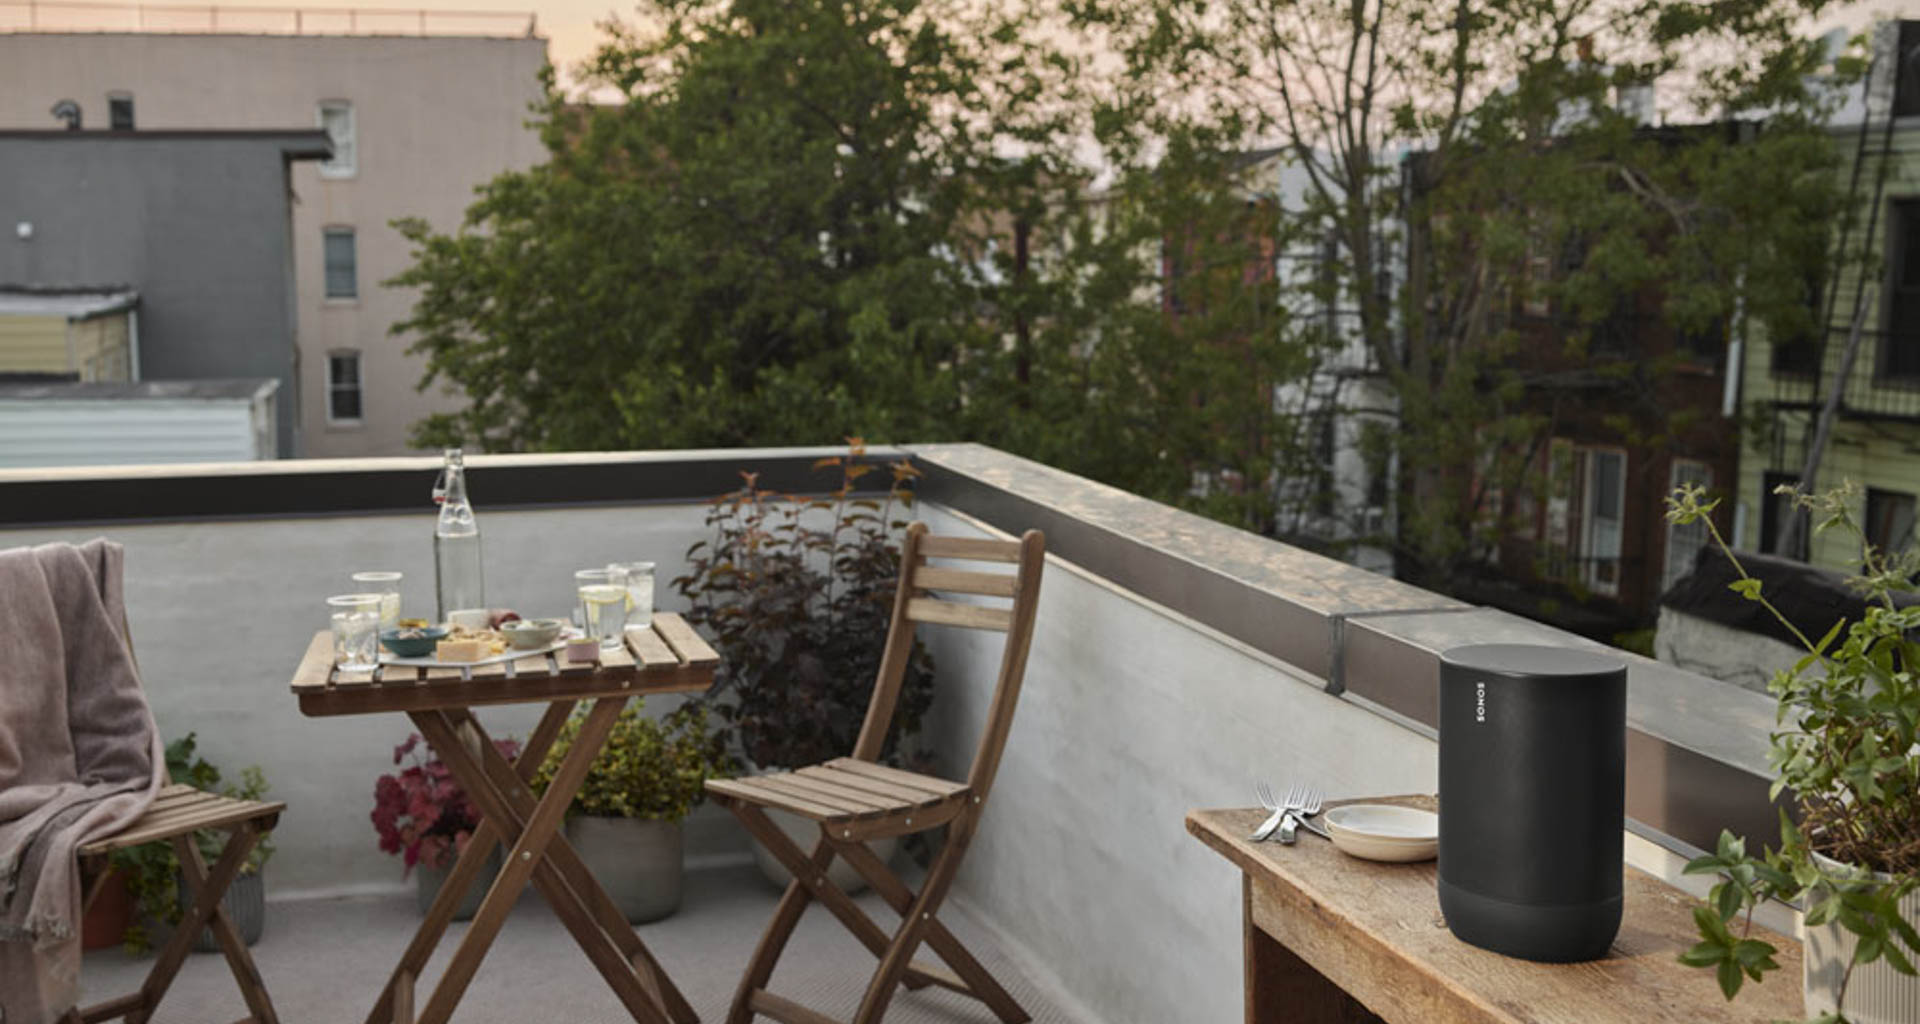 Smart sound systems are as at home outdoors as they are indoors. Here, the Sonos  Move smart speaker. Image: Sonos.